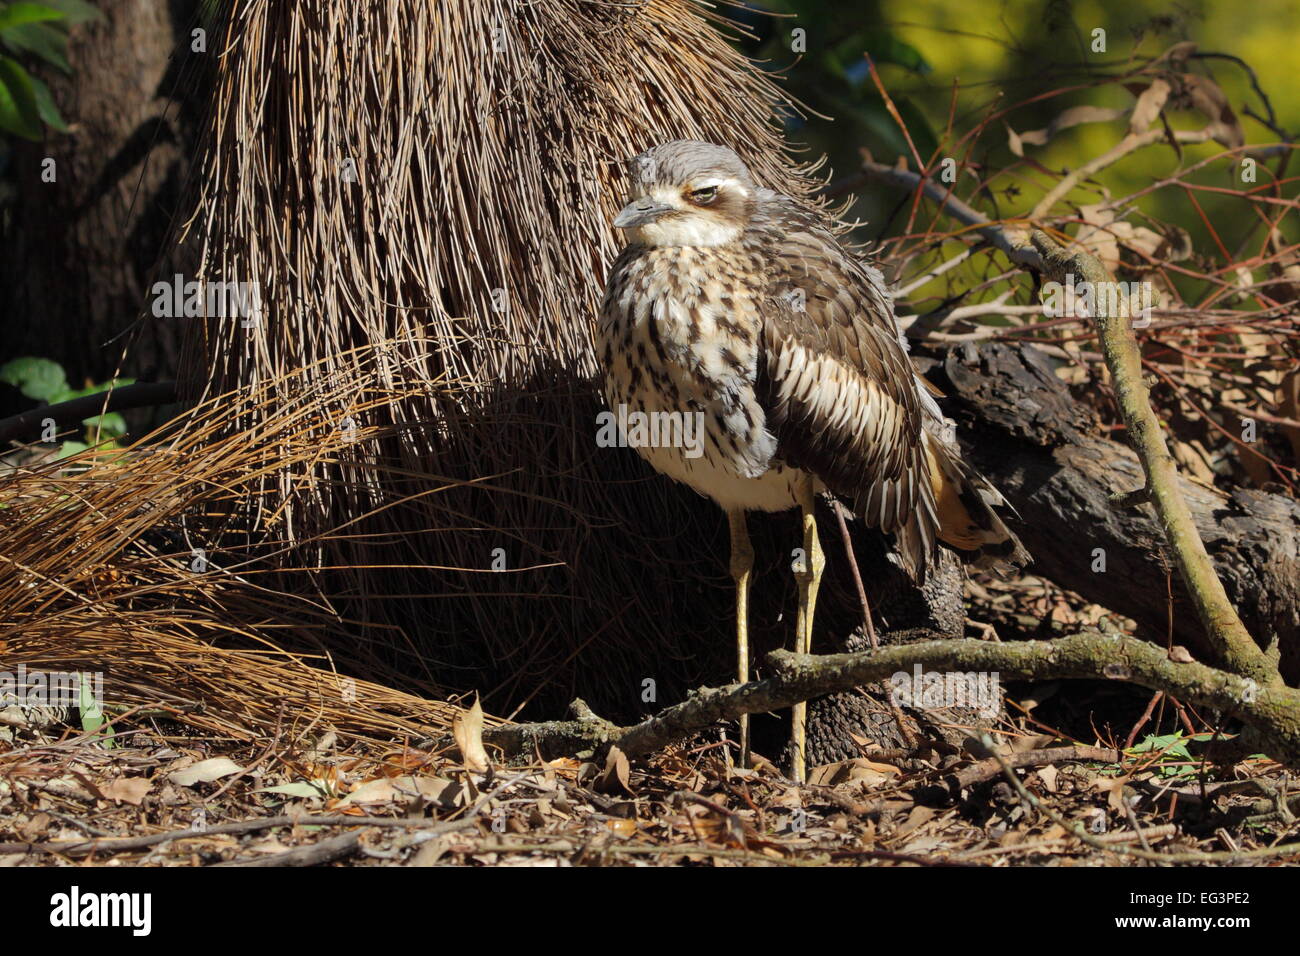 A Bush Stone-curlew (Burhinus grallarius), also called bush thick-knee, is camouflaged among shrubs and leaf litter in Qld. Stock Photo